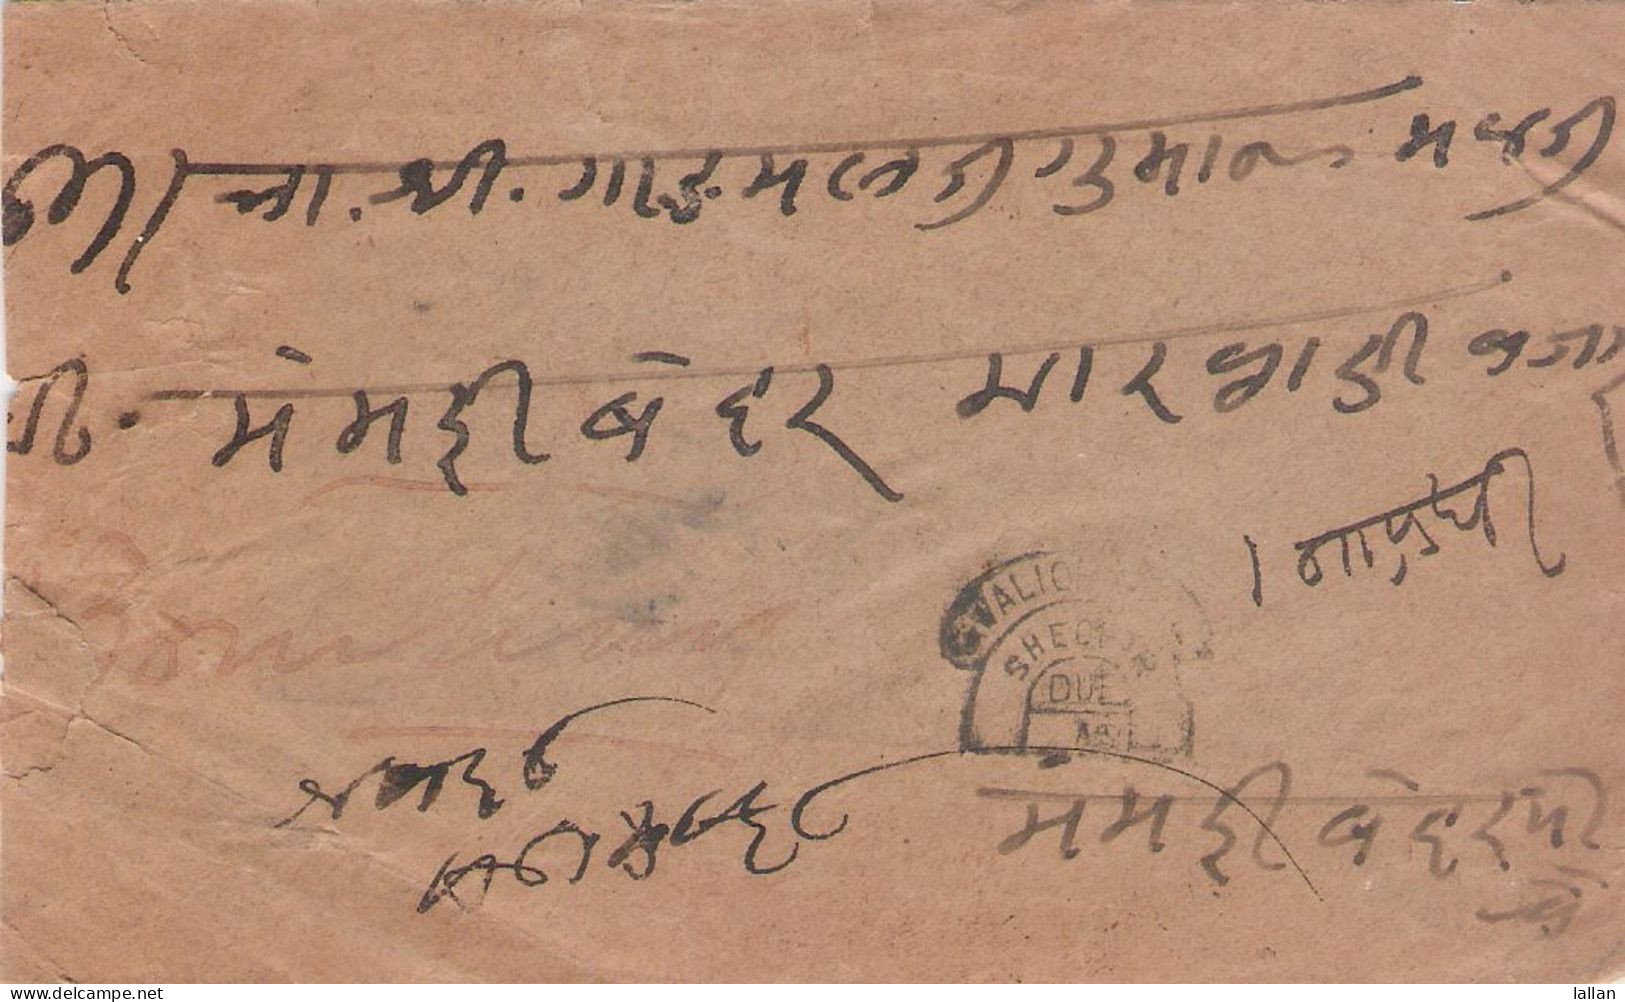 Snake, Cobra, 1911, Postage Due, Gwalior, India, Genuinely Used Stampless Cover, Condition As Per Scan - Gwalior